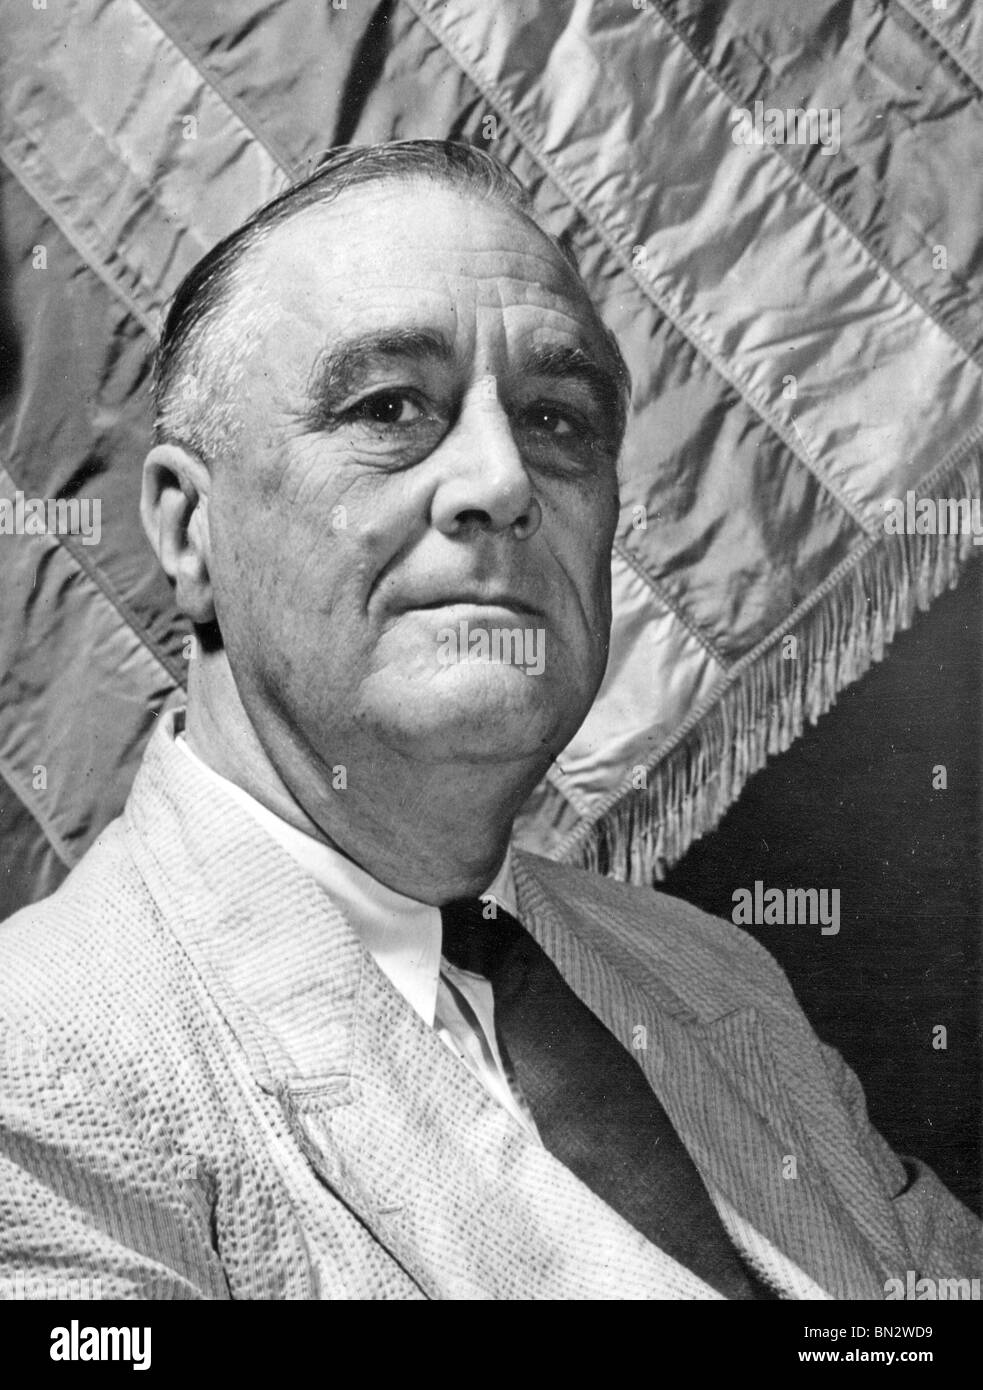 FRANKLIN DELANO ROOSEVELT (1882-1945) US Democratic statesman and 32nd President of the USA Stock Photo